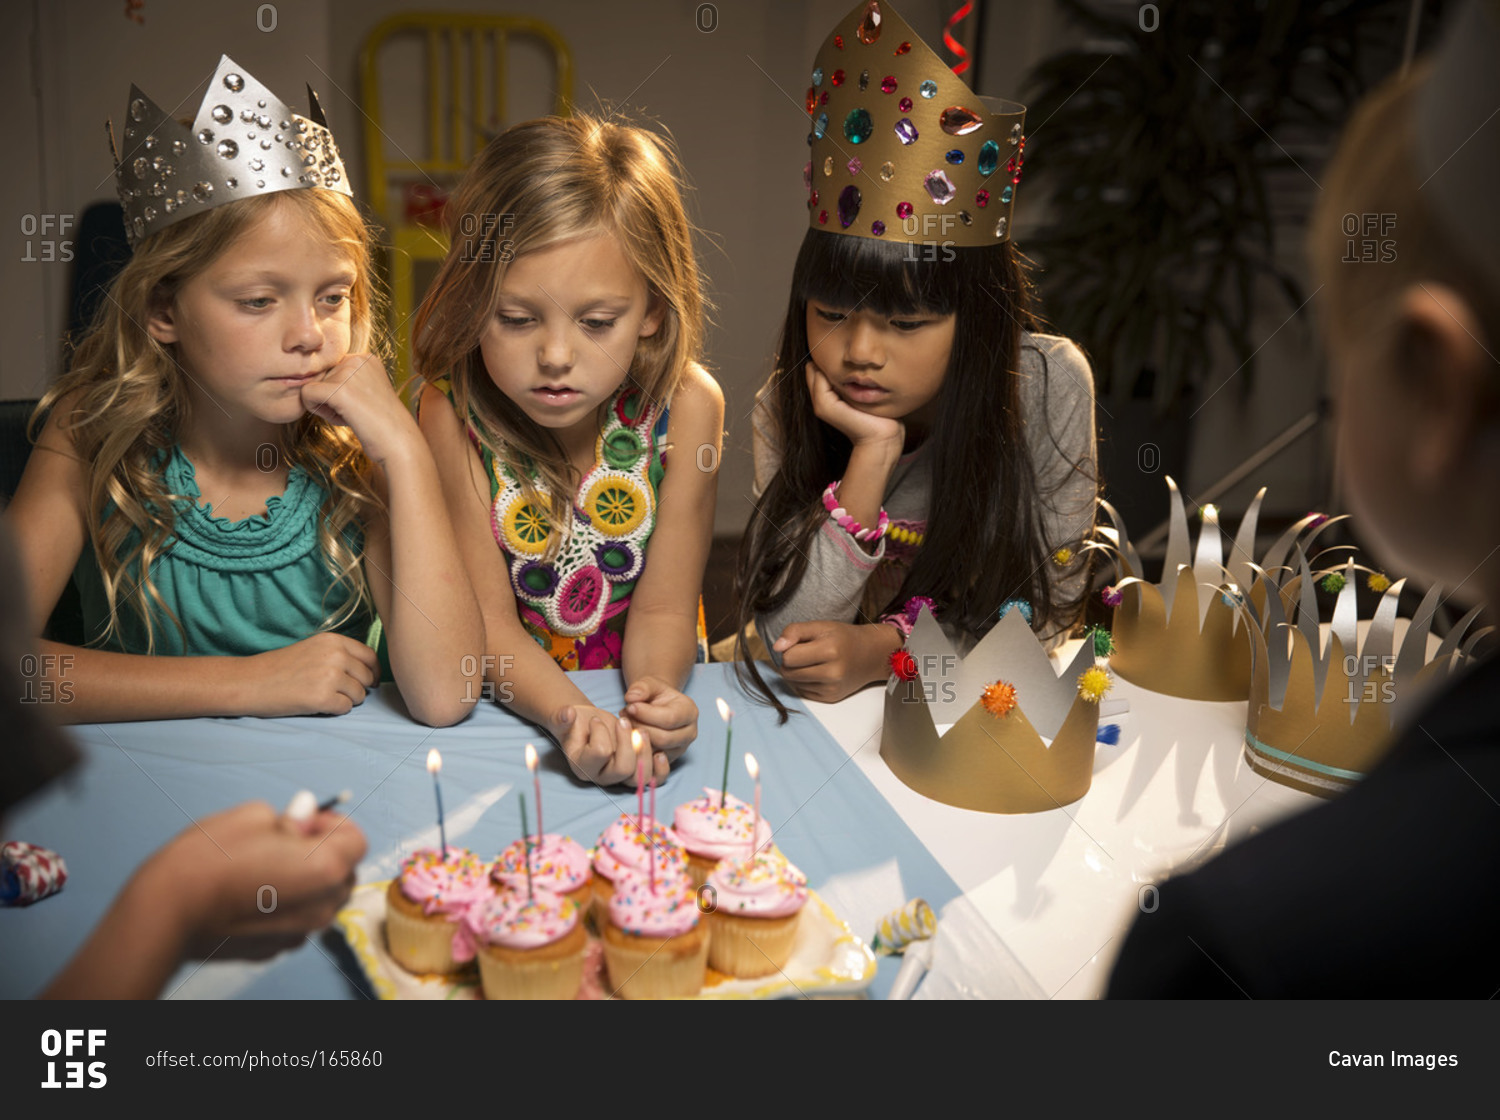 Children at birthday party watch candles being lighted